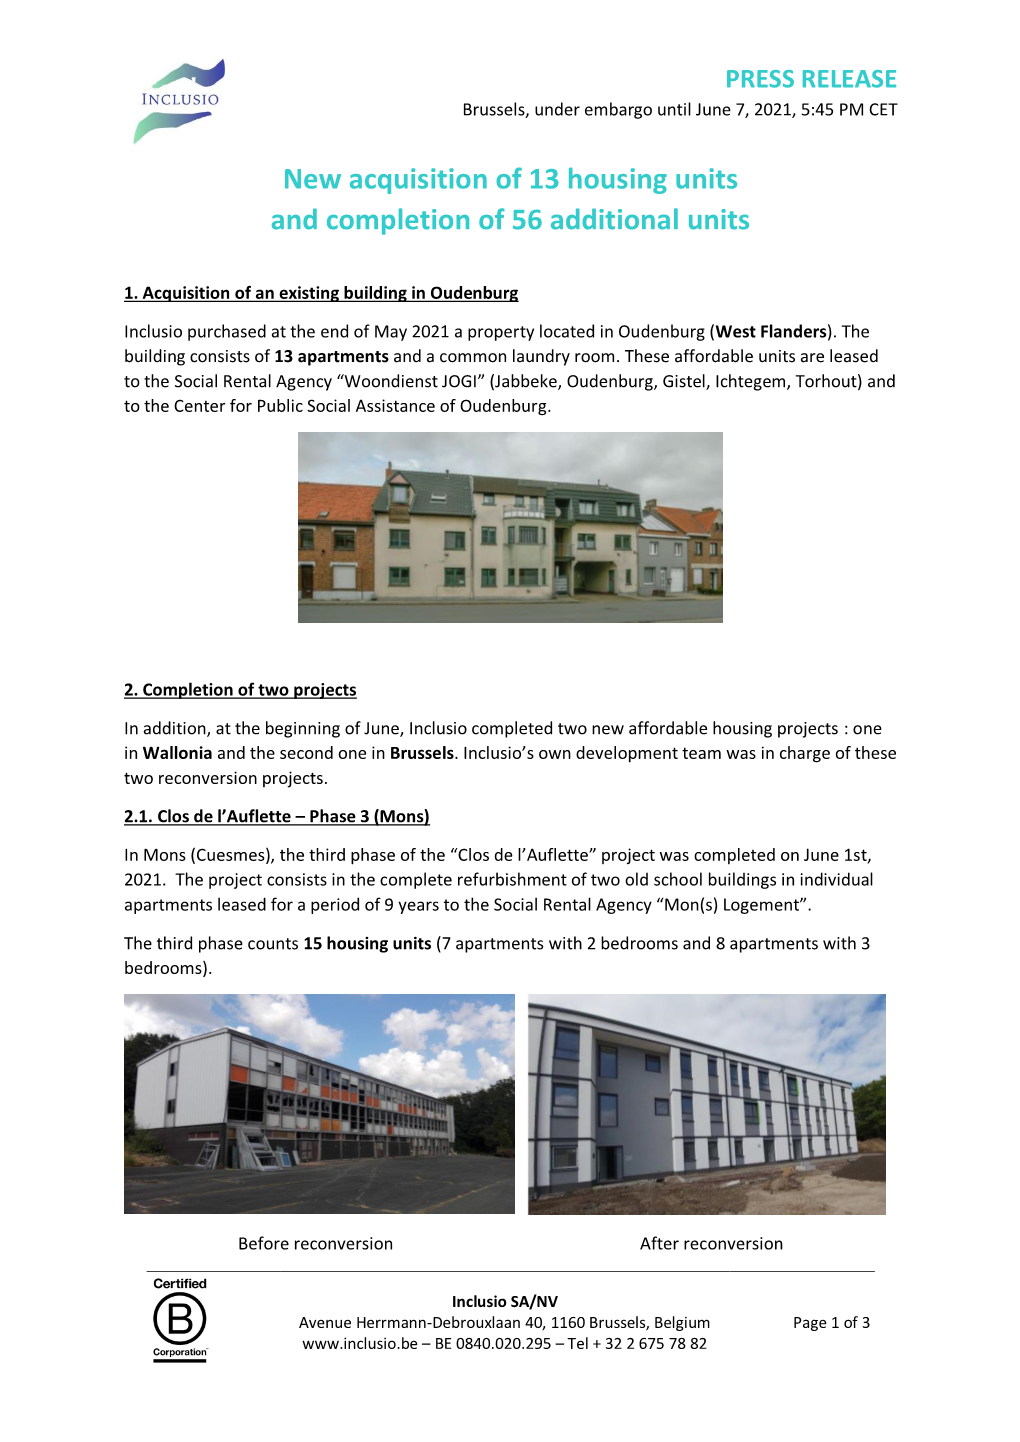 New Acquisition of 13 Housing Units and Completion of 56 Additional Units